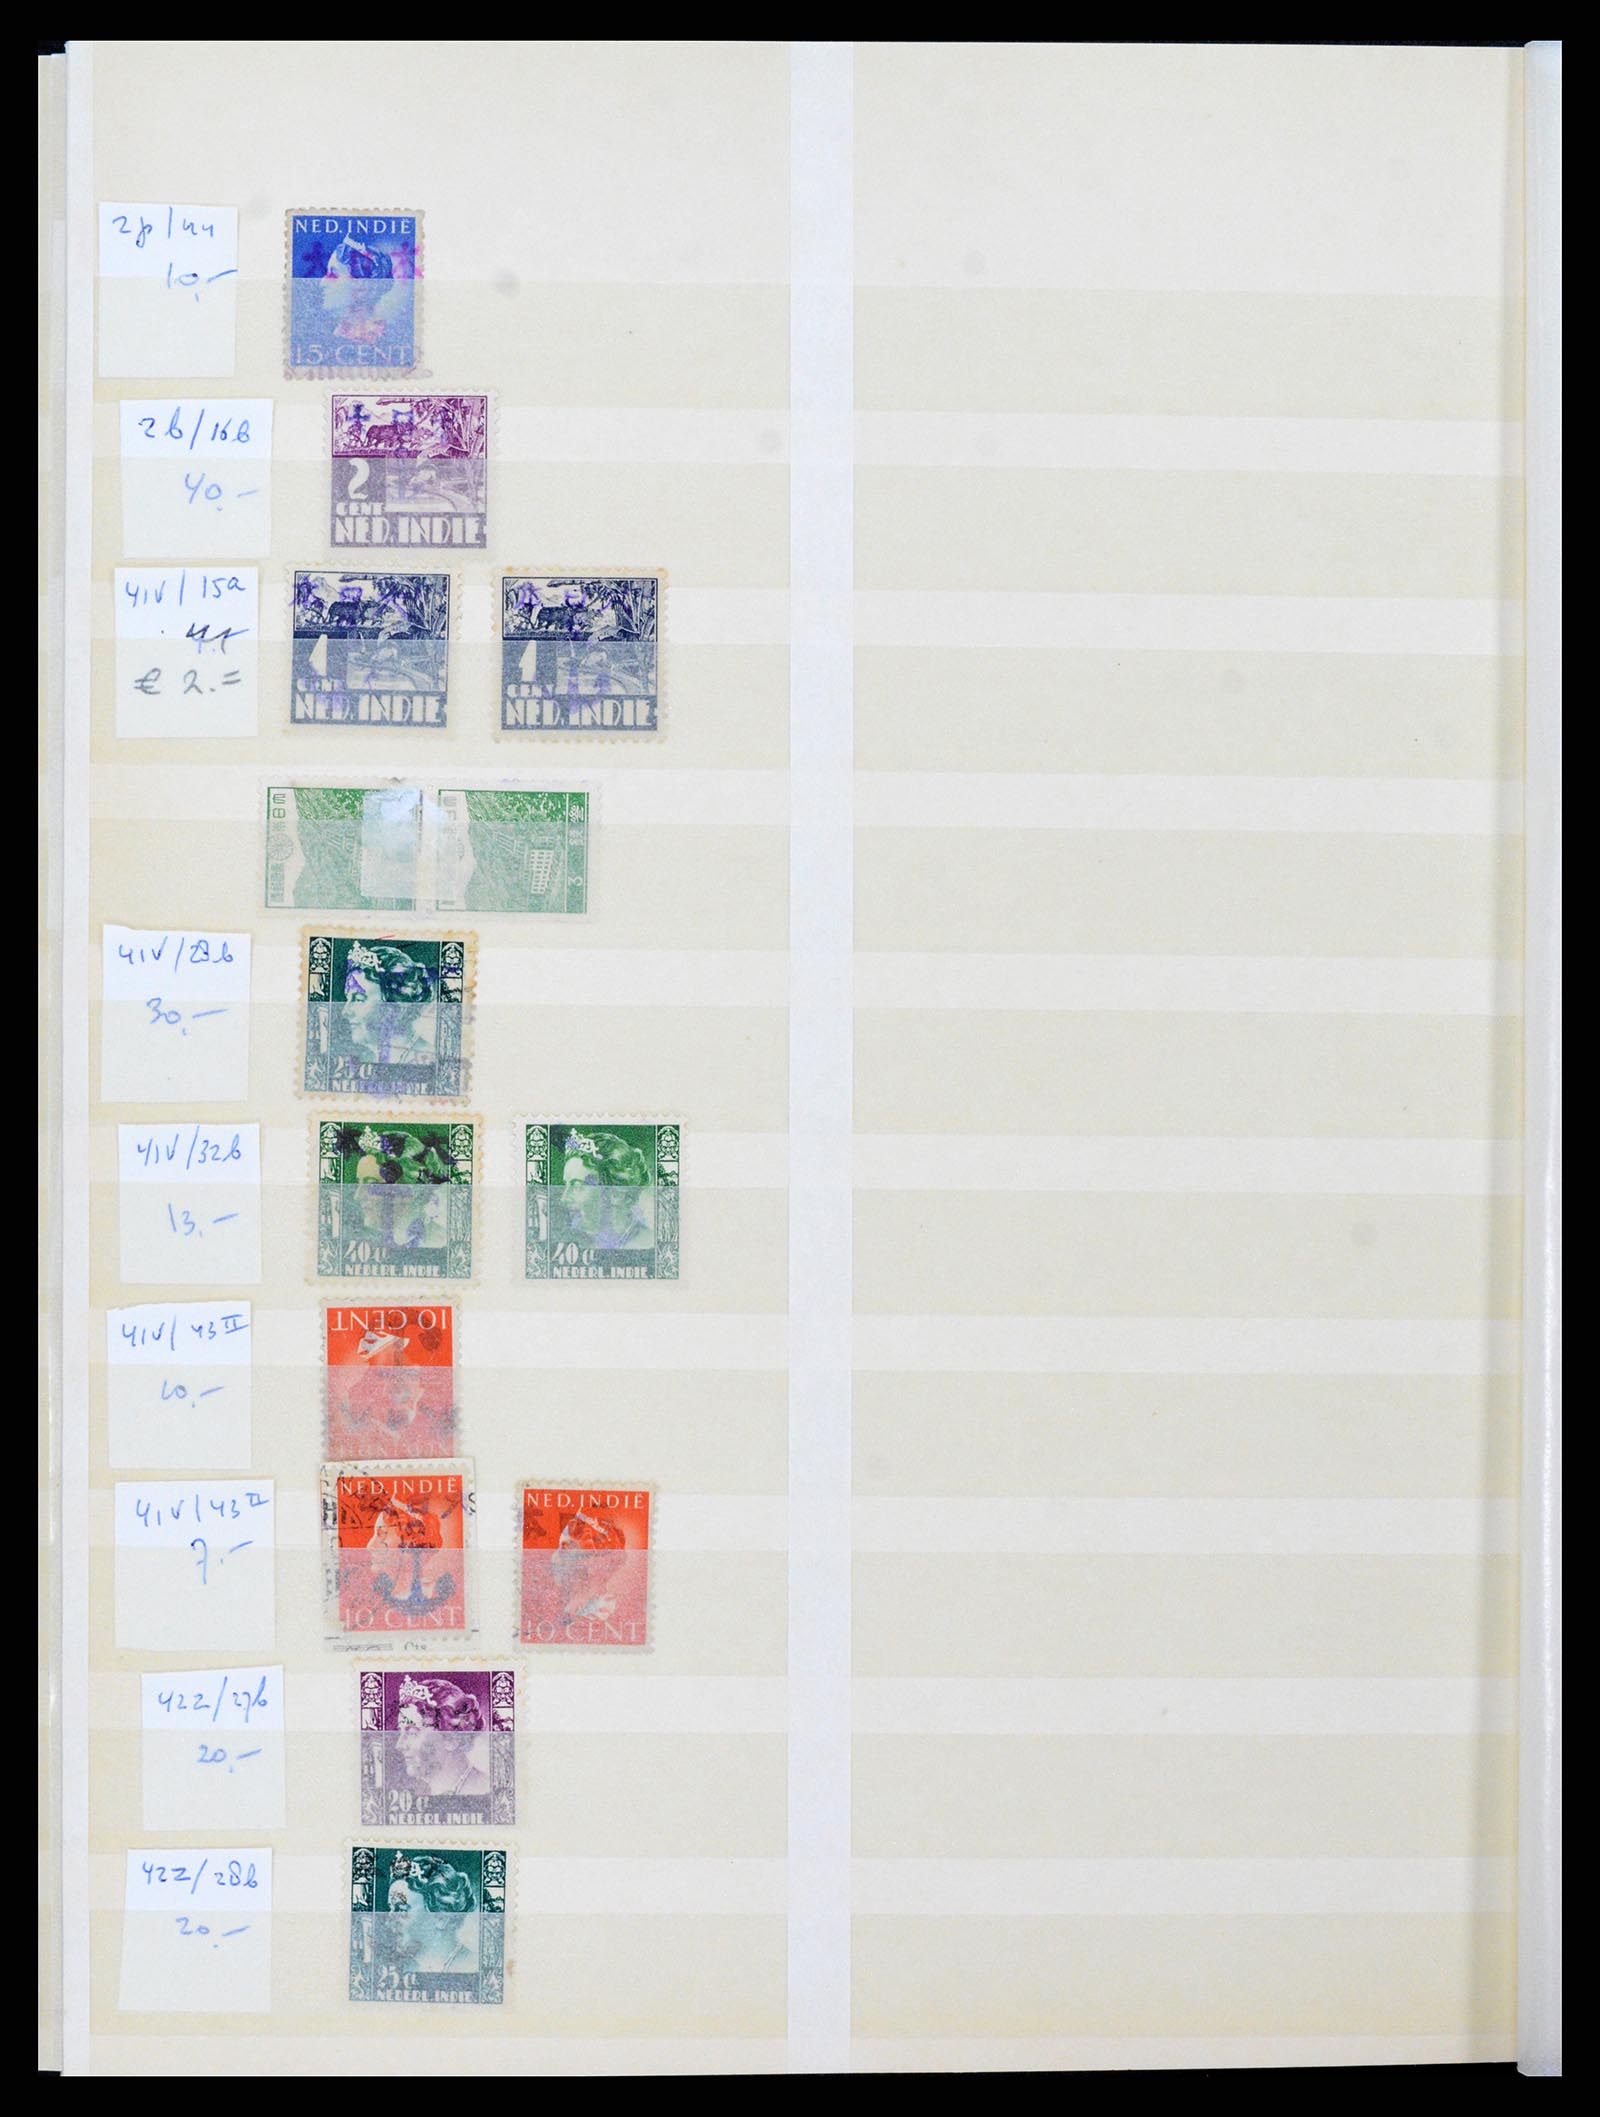 37429 024 - Stamp collection 37429 Japanese occupation Dutch East Indies 1942-1945.